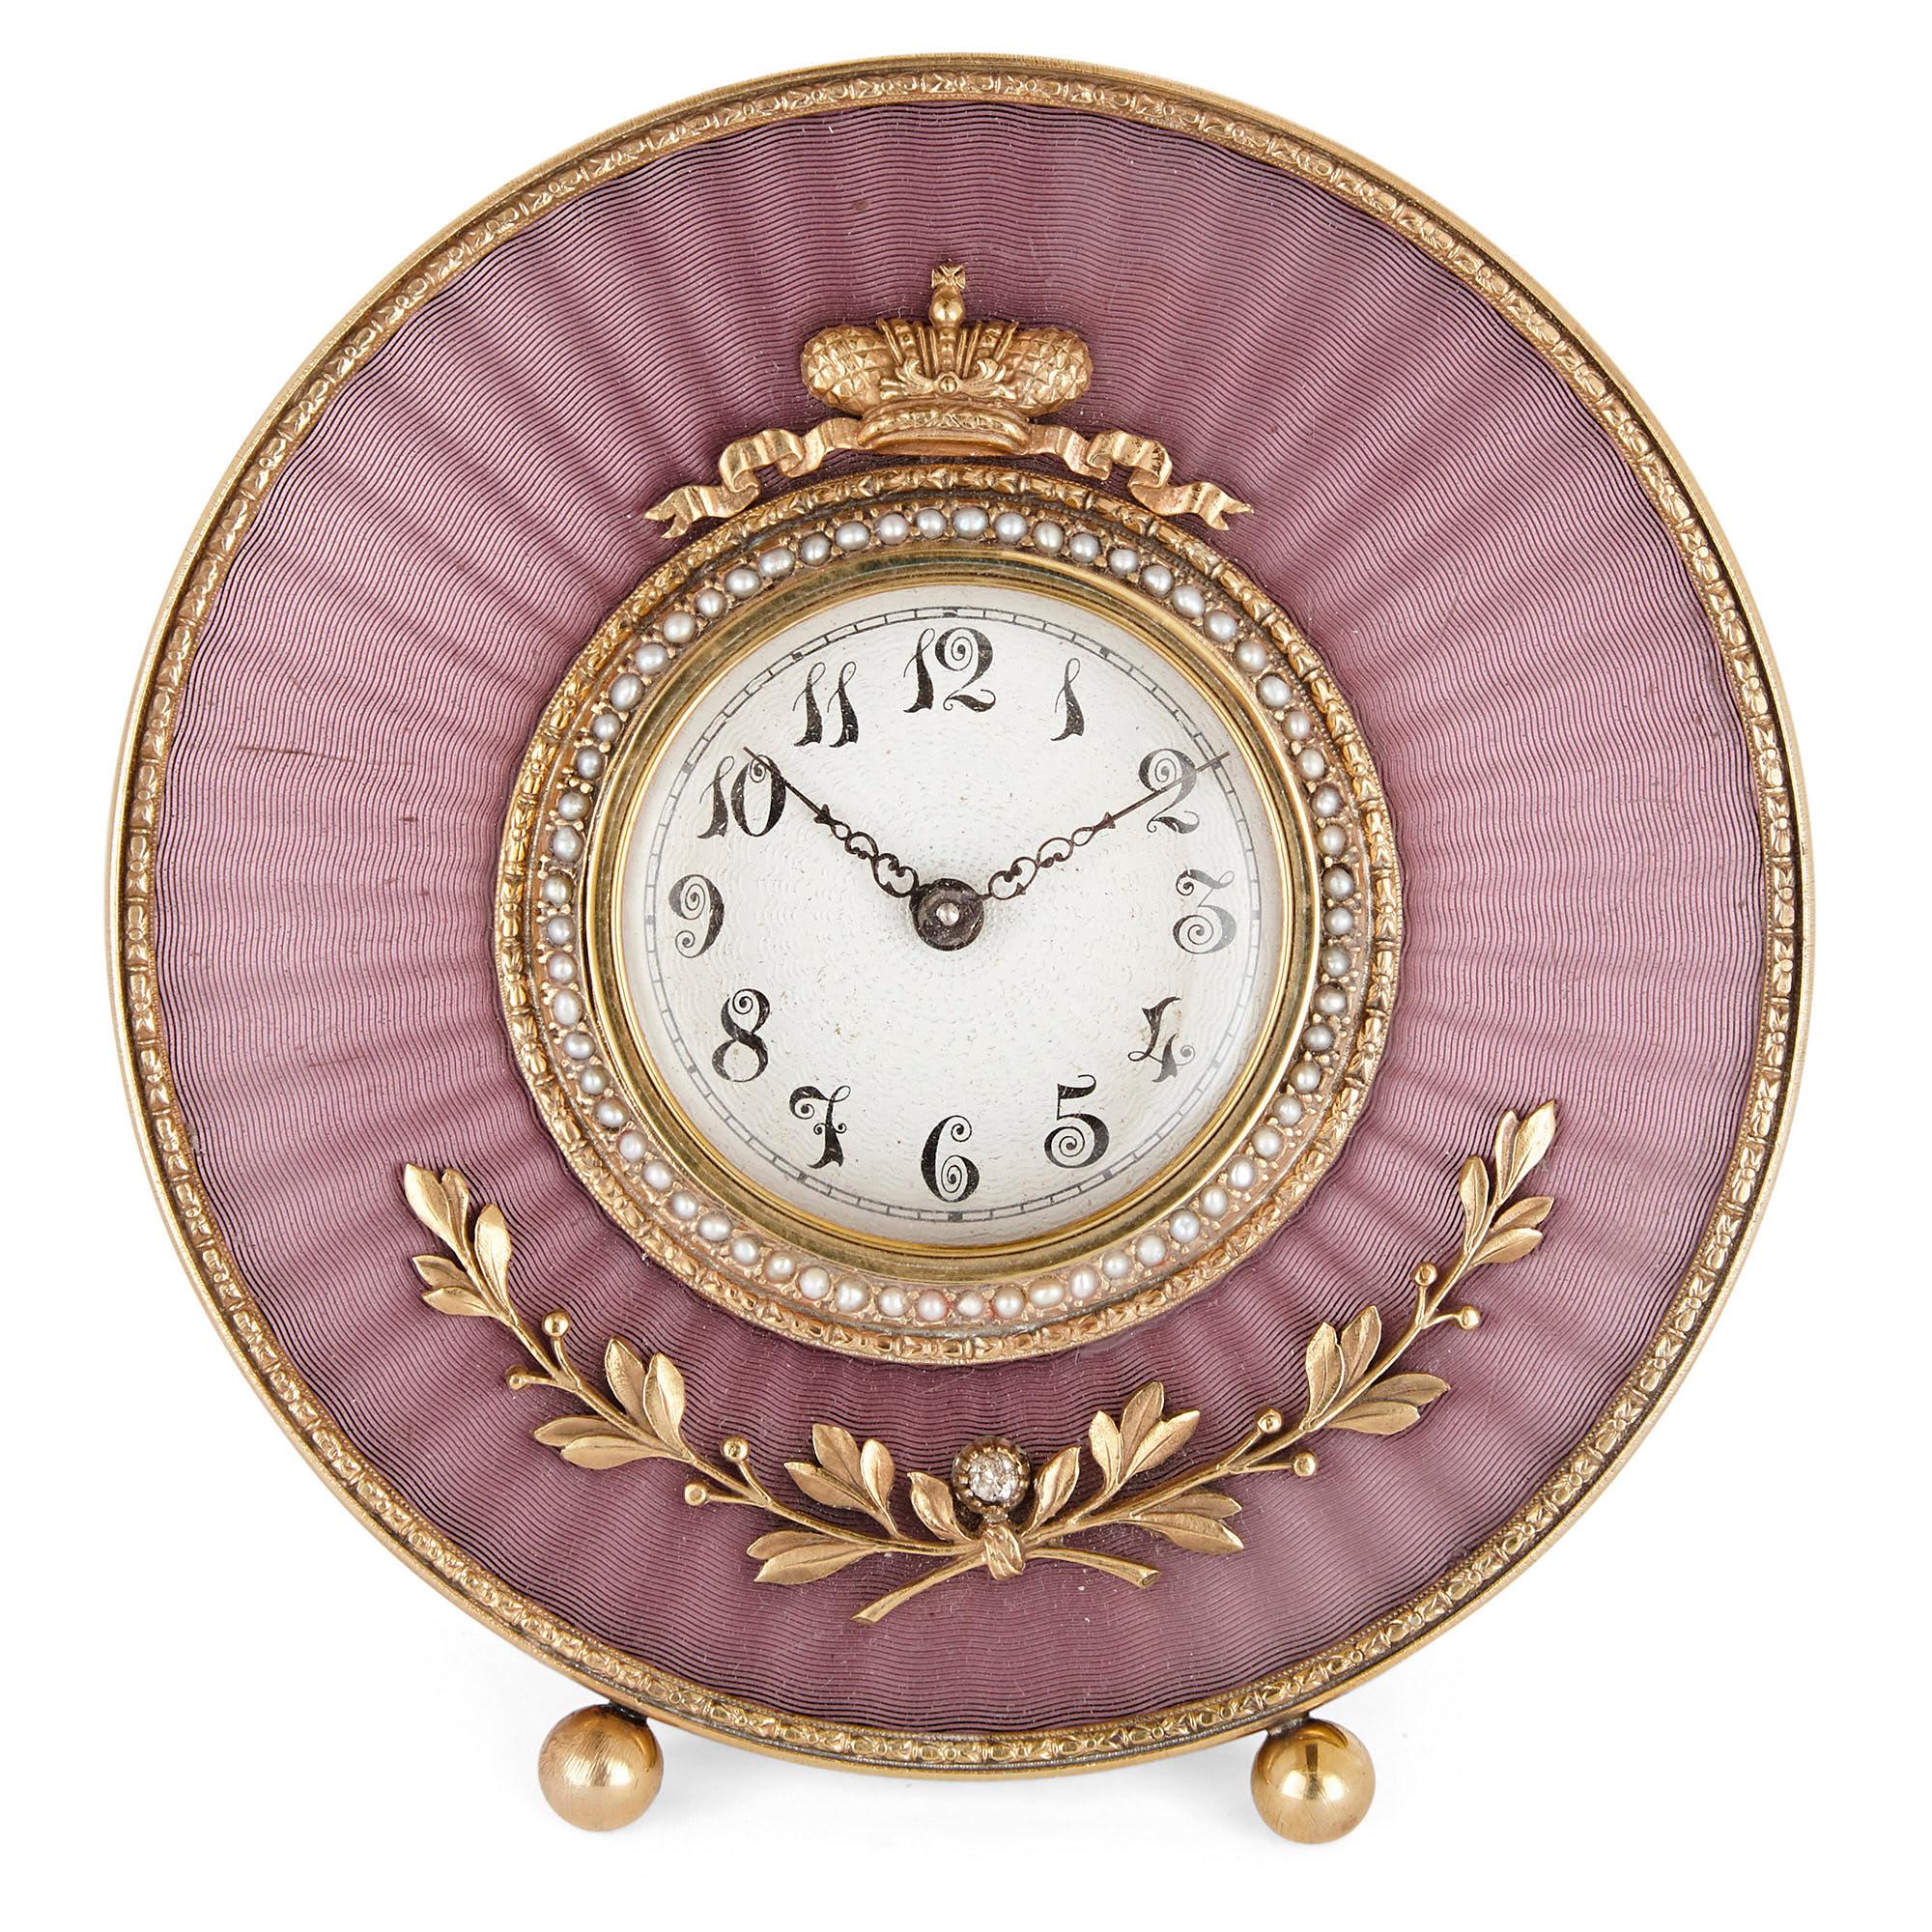 This circular shaped table clock is created in the manner of Fabergé. The surface of the clock has been finished with exquisite guilloché enamel, the circular outer edge of which being framed by a gold foliate band. The dial, inscribed with Arabic